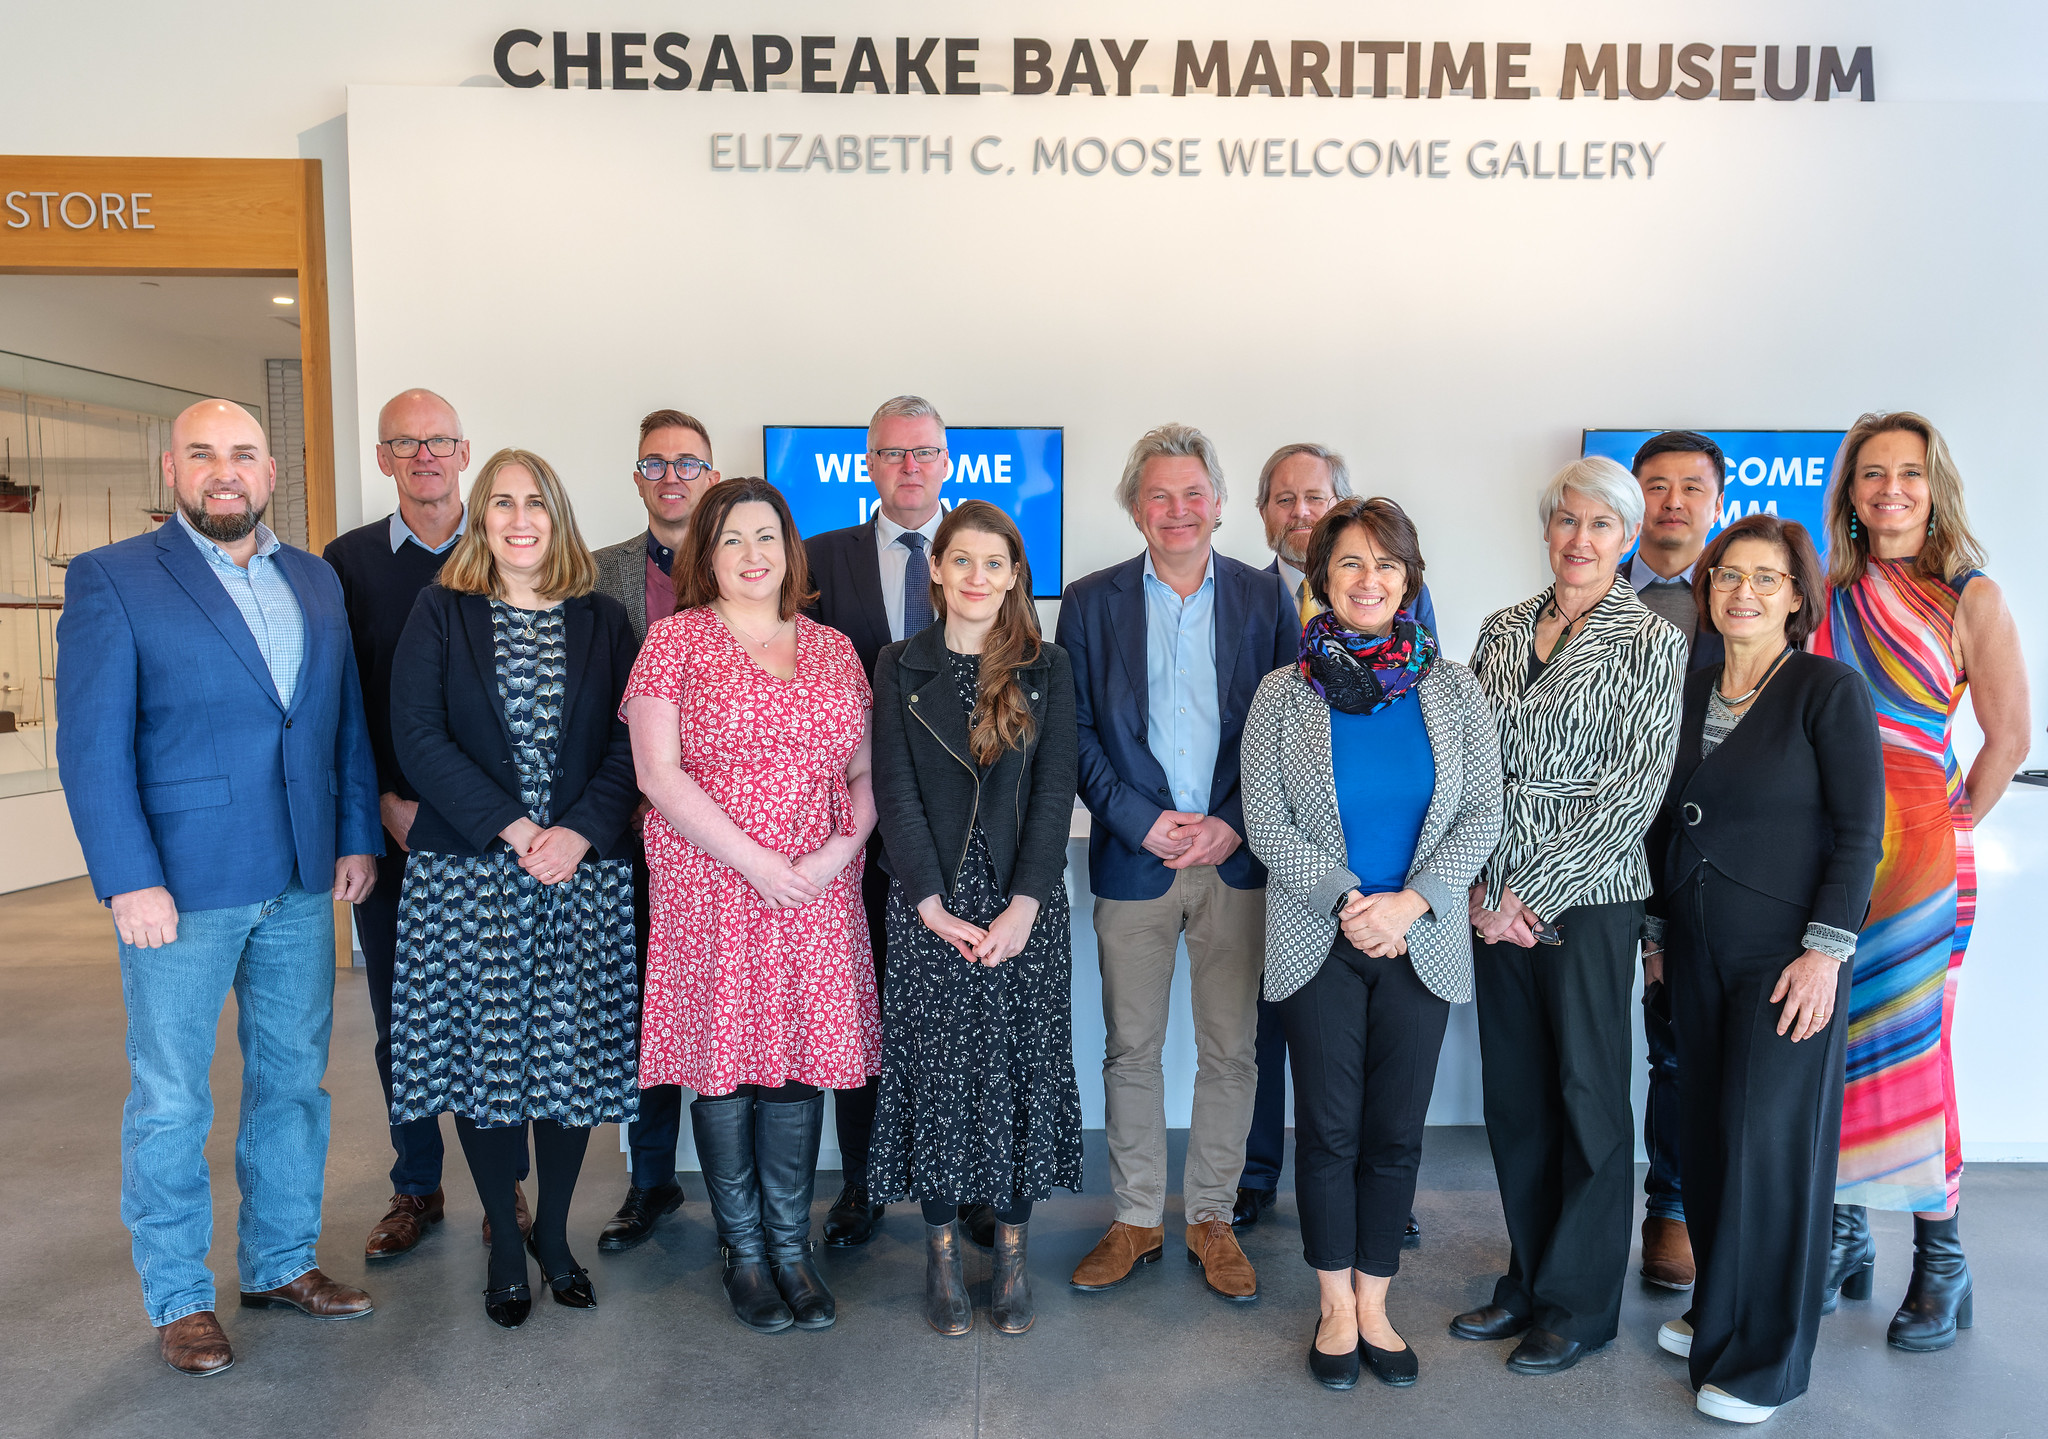 The International Congress of Maritime Museum’s Executive Council gathered in CBMM’s new Welcome Center for a closing dinner as part of its annual meeting last week. (Photo by George Sass)